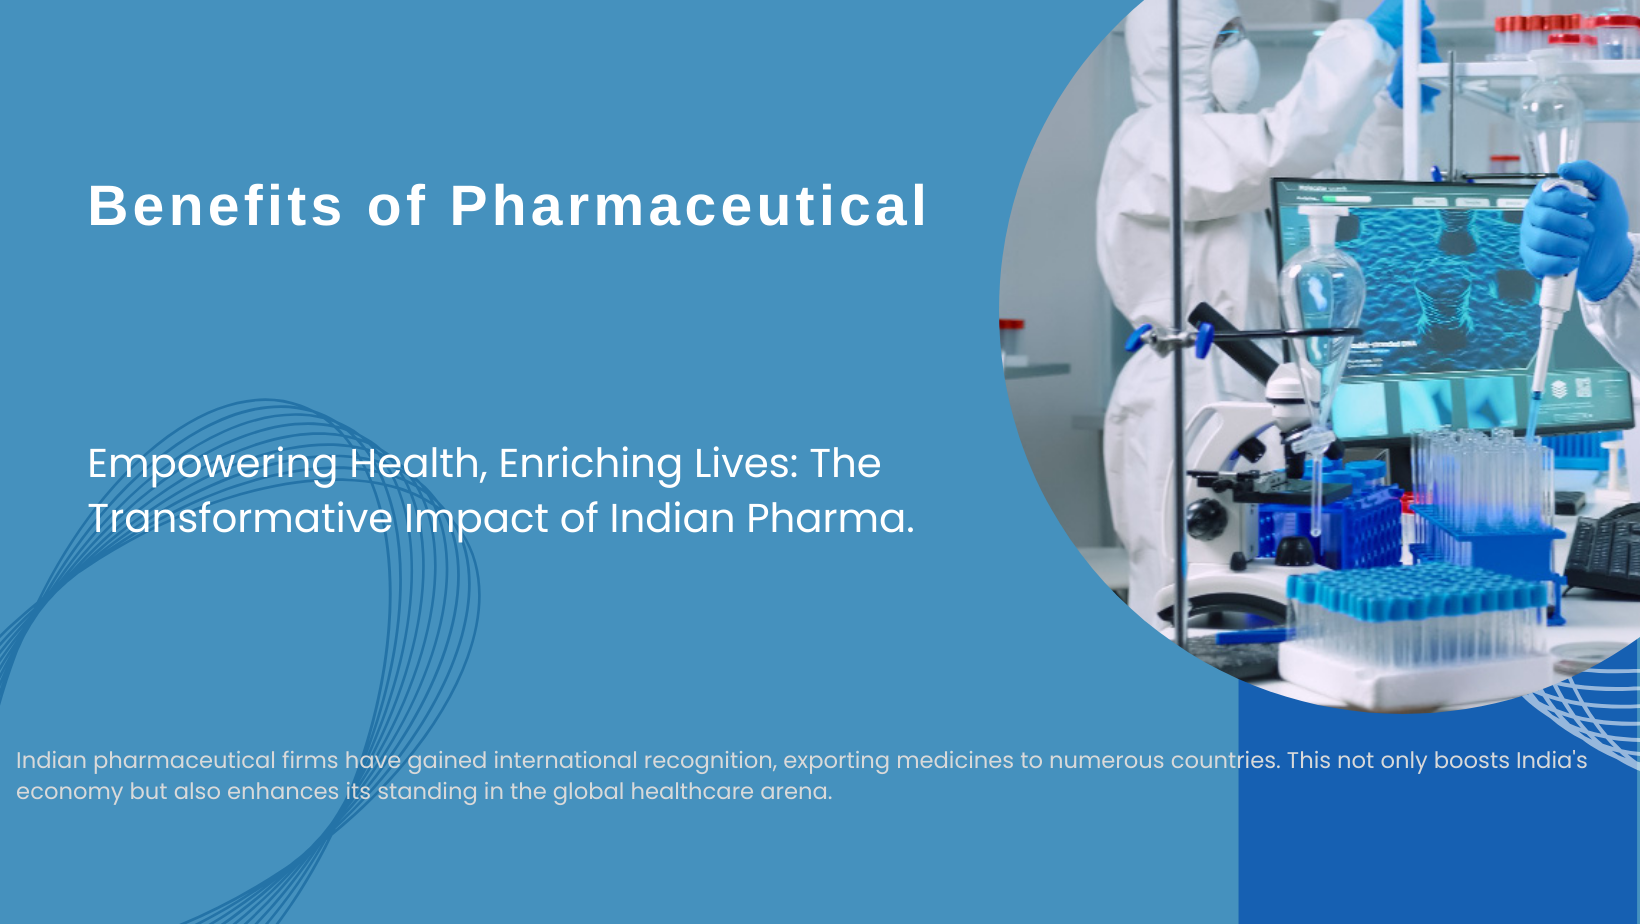 Benefits of Pharmaceutical Companies in India